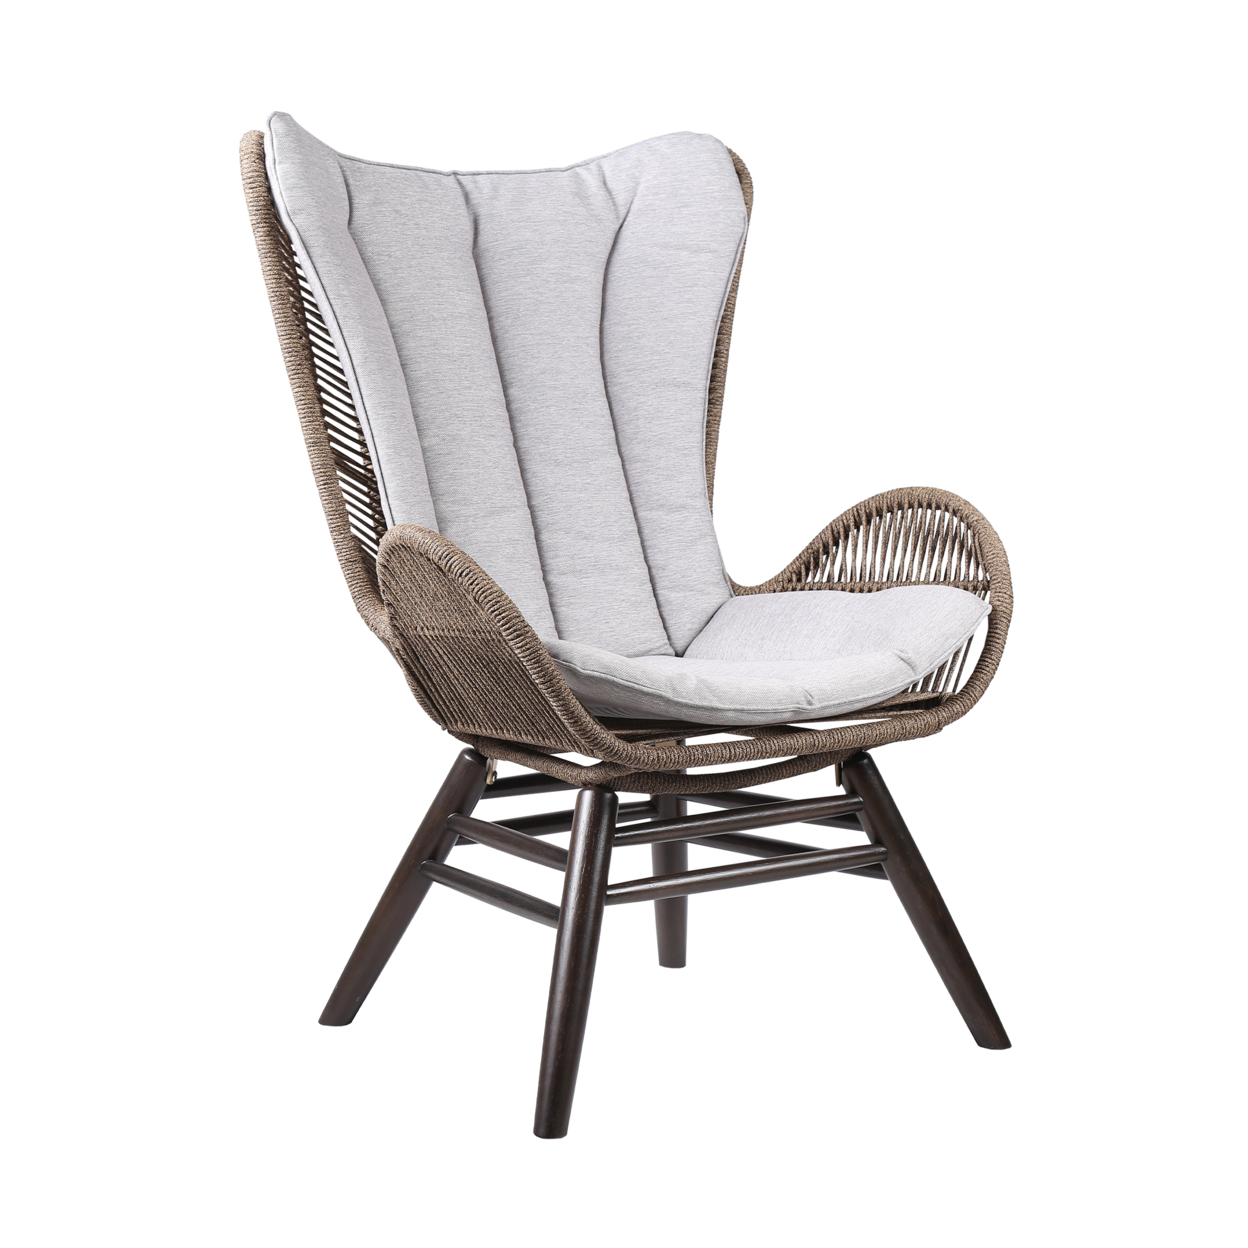 Indoor Outdoor Lounge Chair With Intricate Rope Woven Wingback, Brown- Saltoro Sherpi